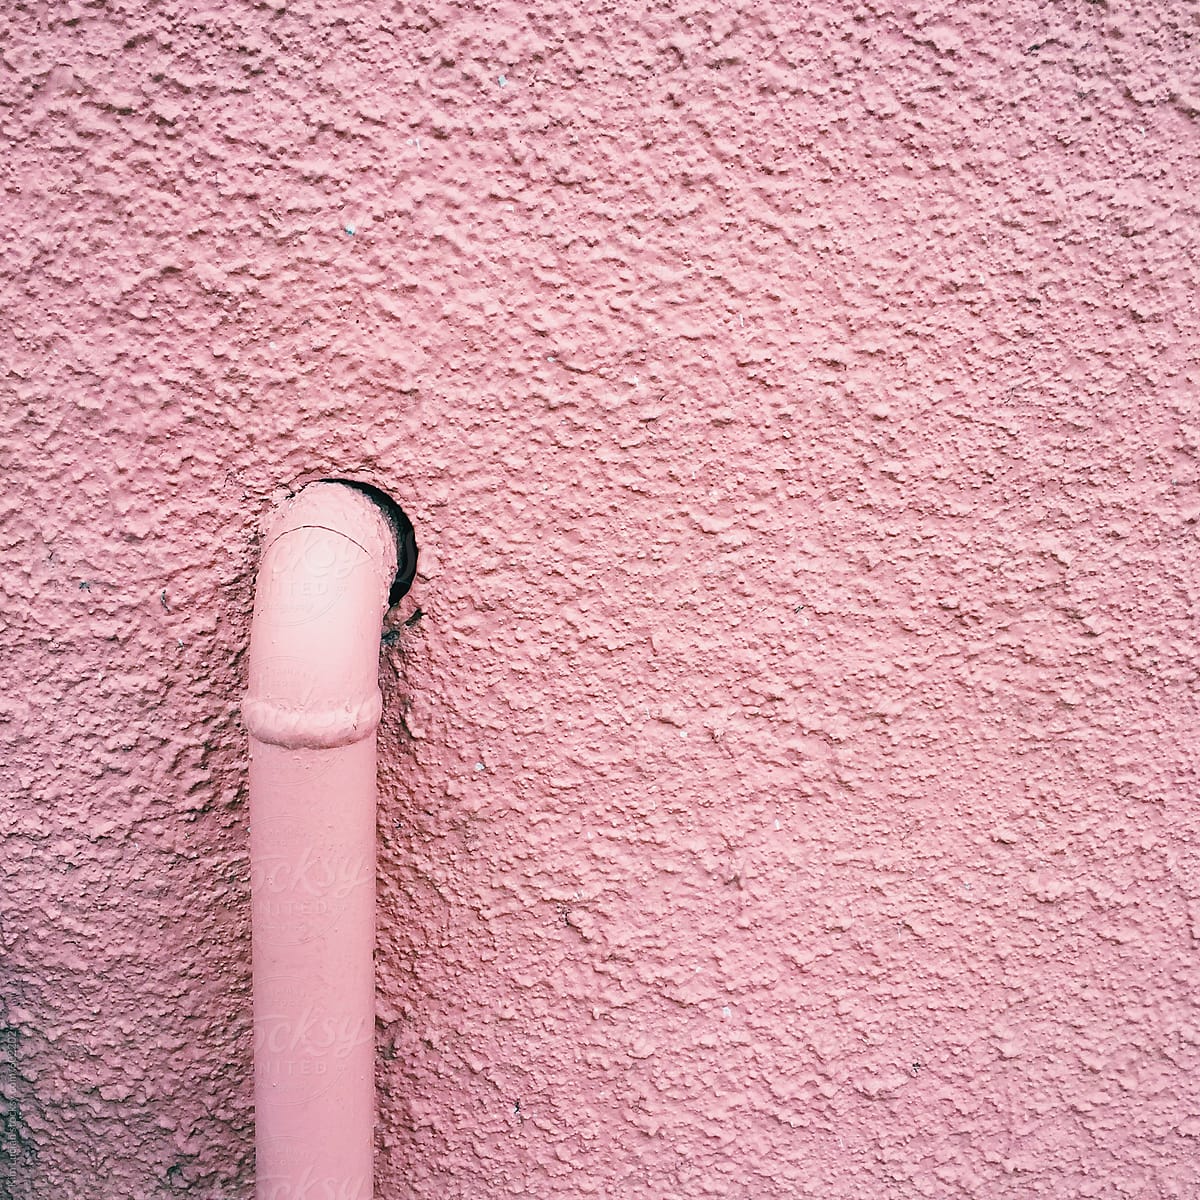 Pink Pipe against Pink Wall